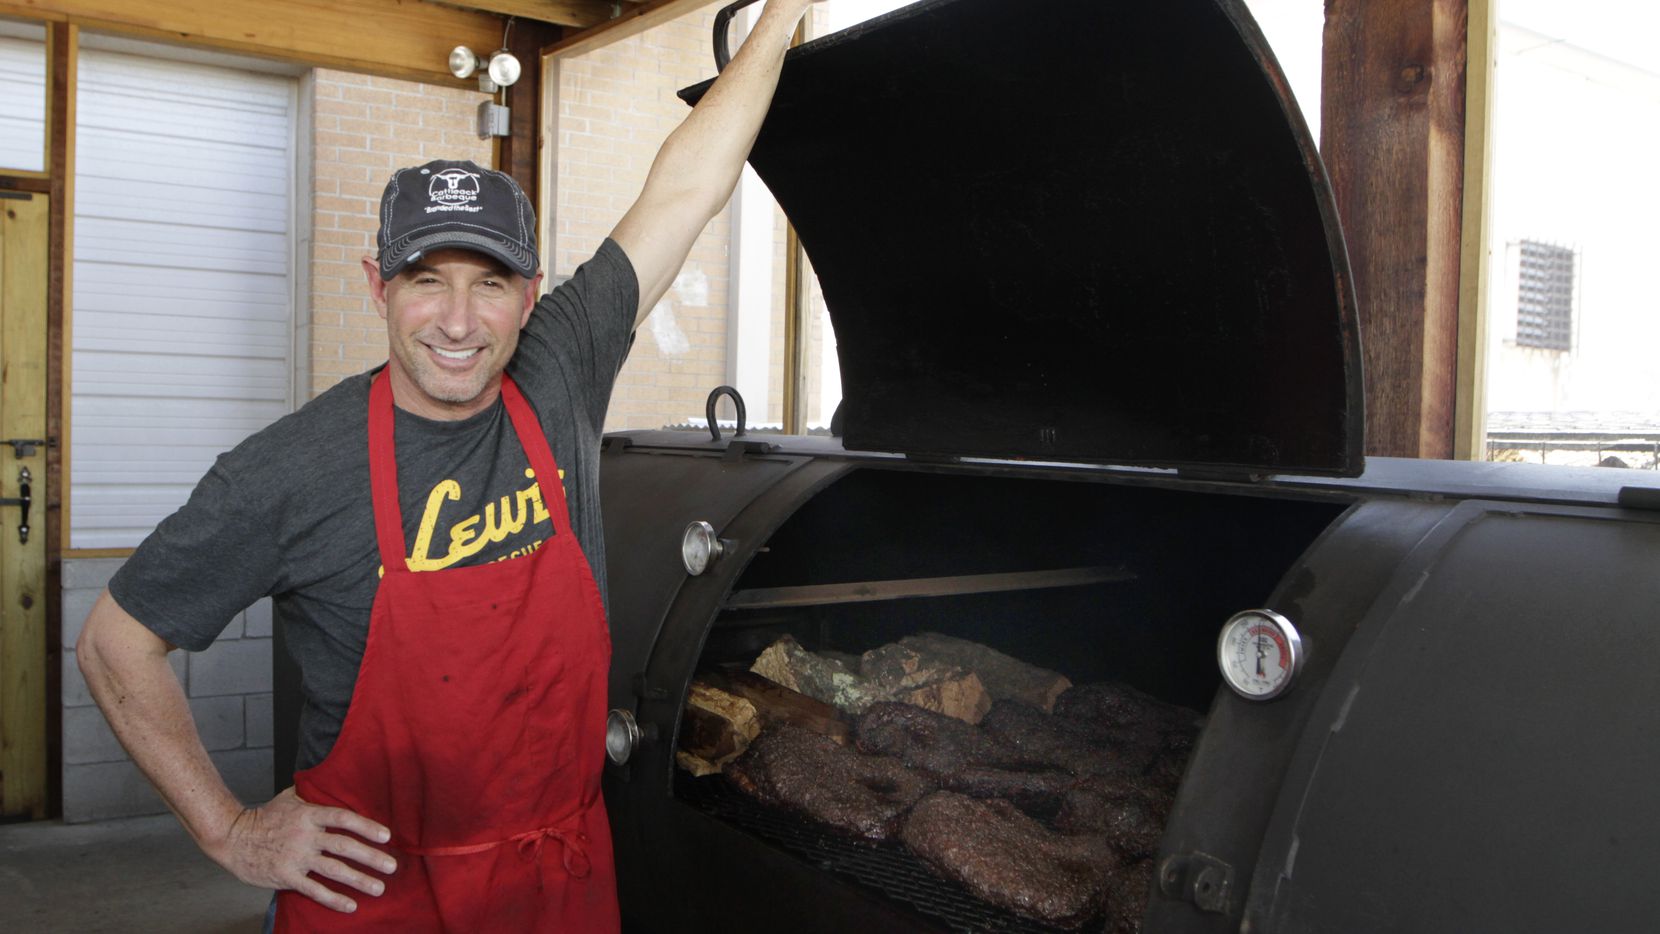 Co-owner Todd David opens the lid on his massive 1000-gallon smoker, Brutus, at Cattleack Barbeque restaurant, Thursday, May 25, 2017 in Farmers Branch, Texas. (David Woo/The Dallas Morning News)